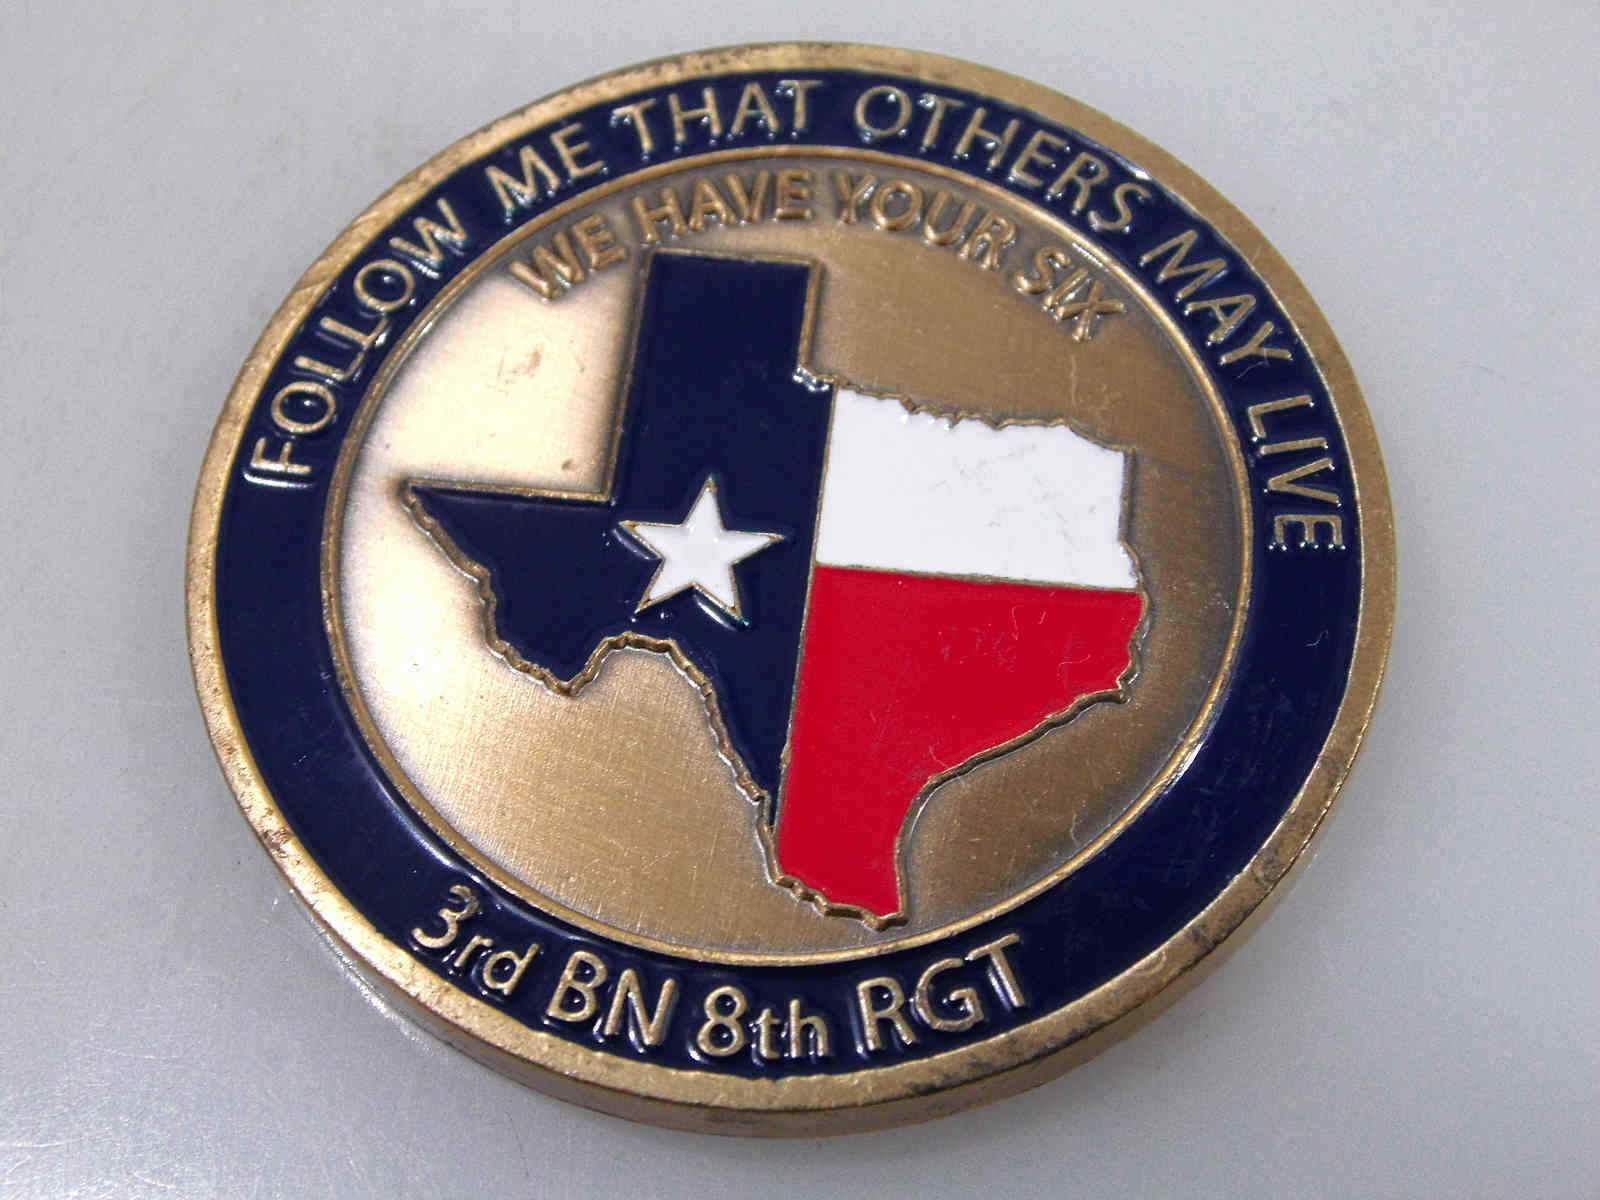 3RD BN 8TH RGT TEXANS SERVING TEXAS CHALLENGE COIN